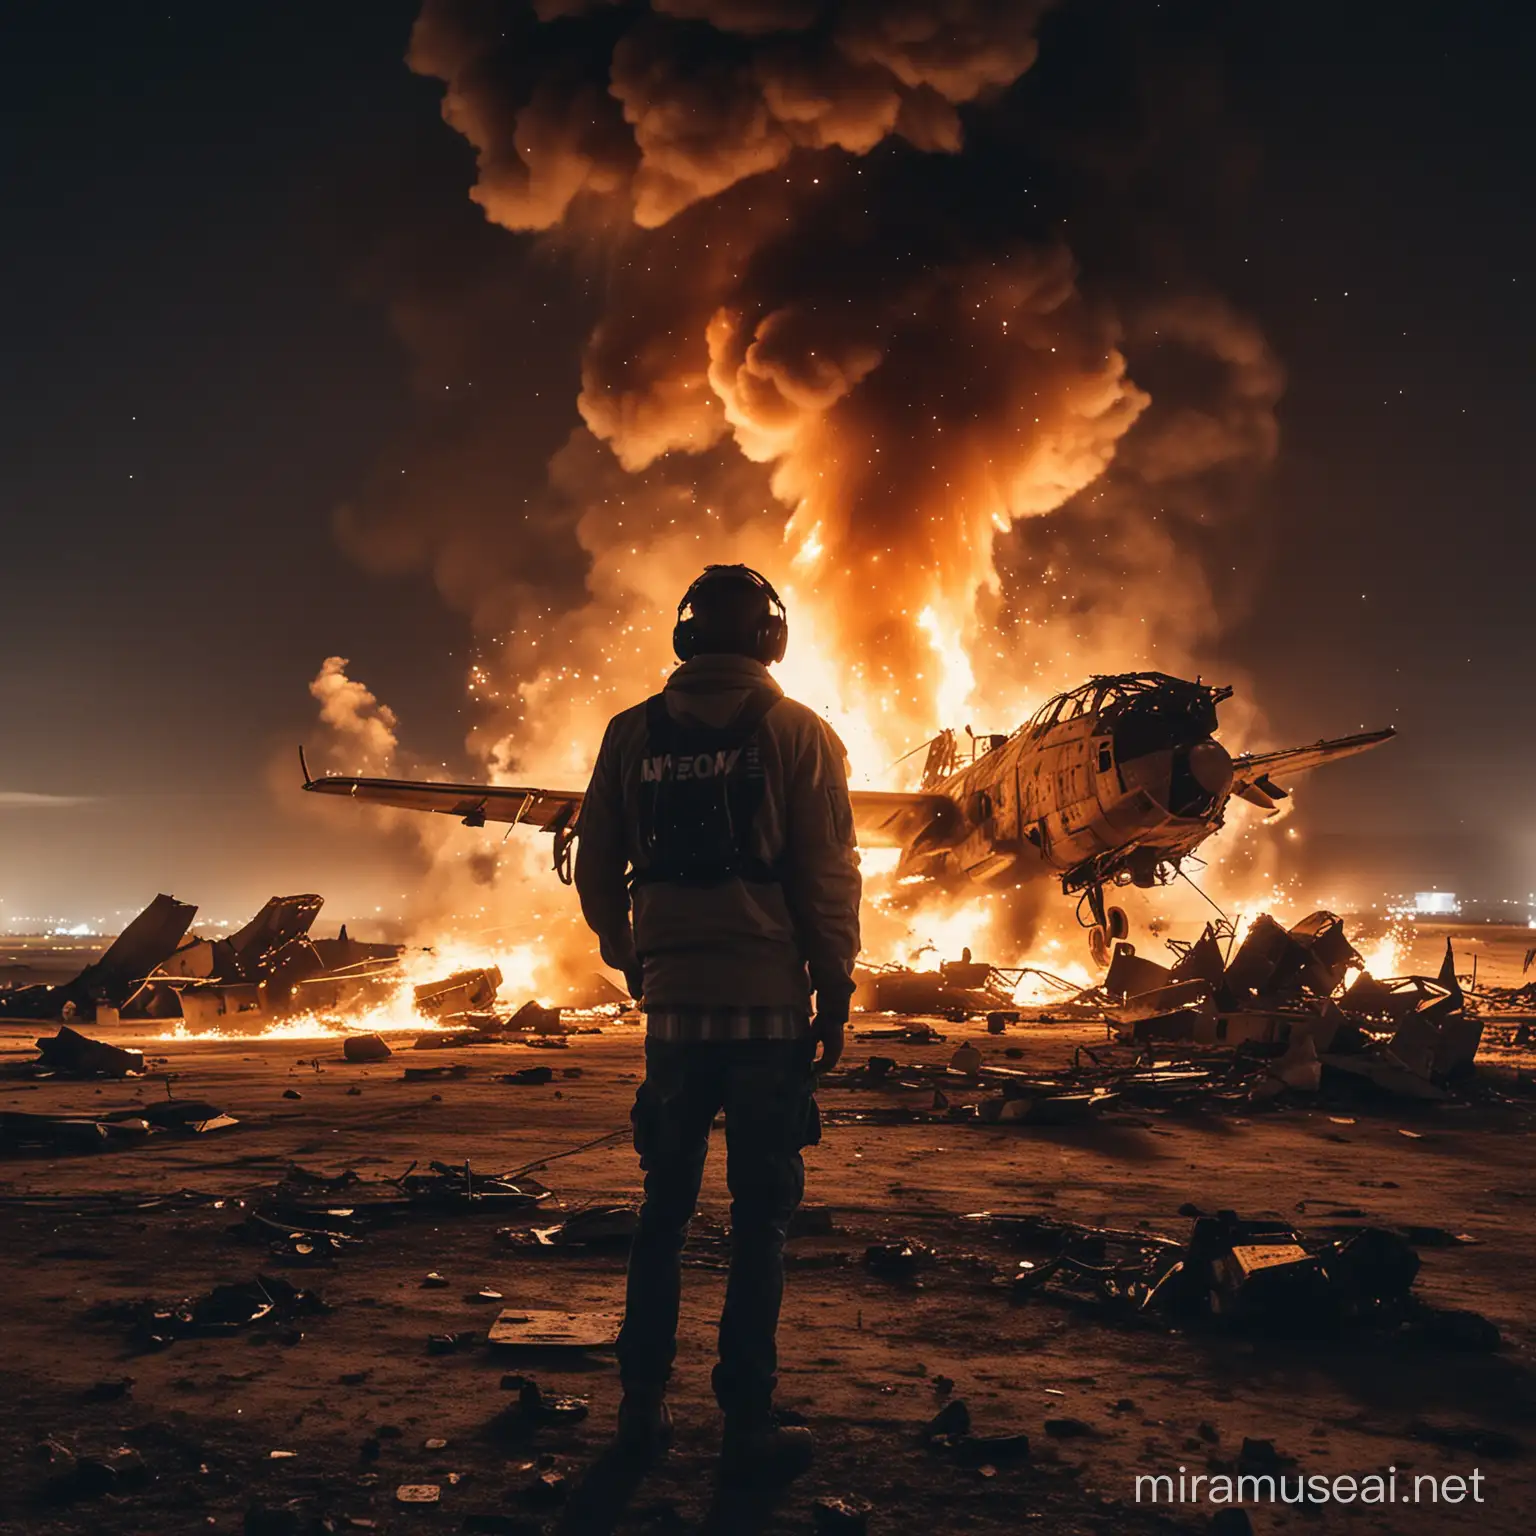 a dj in front of a burning destroyed aircraft on the ground with explosions and war in the background during the night with neaon lights
